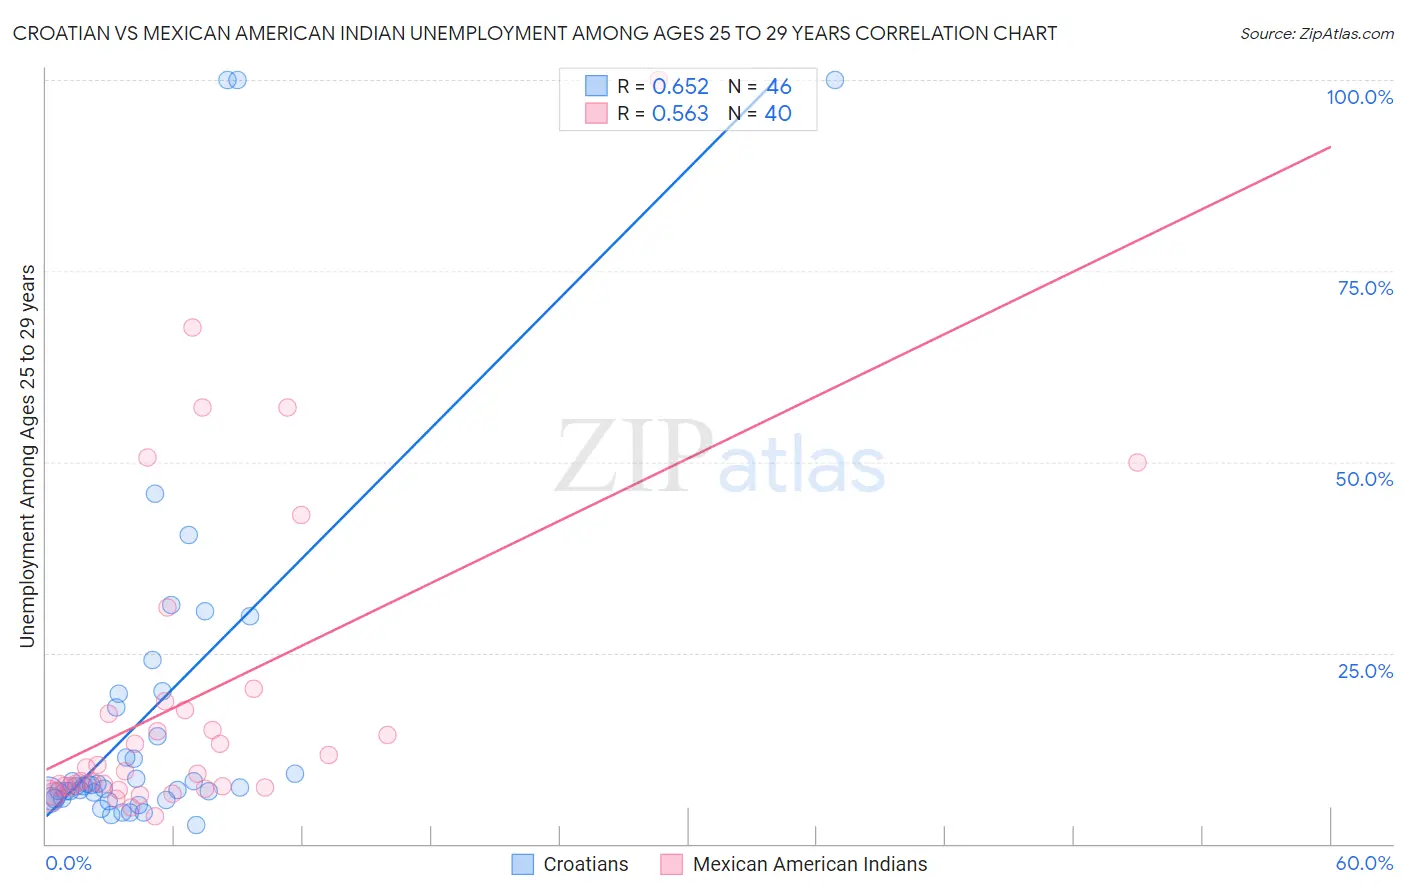 Croatian vs Mexican American Indian Unemployment Among Ages 25 to 29 years